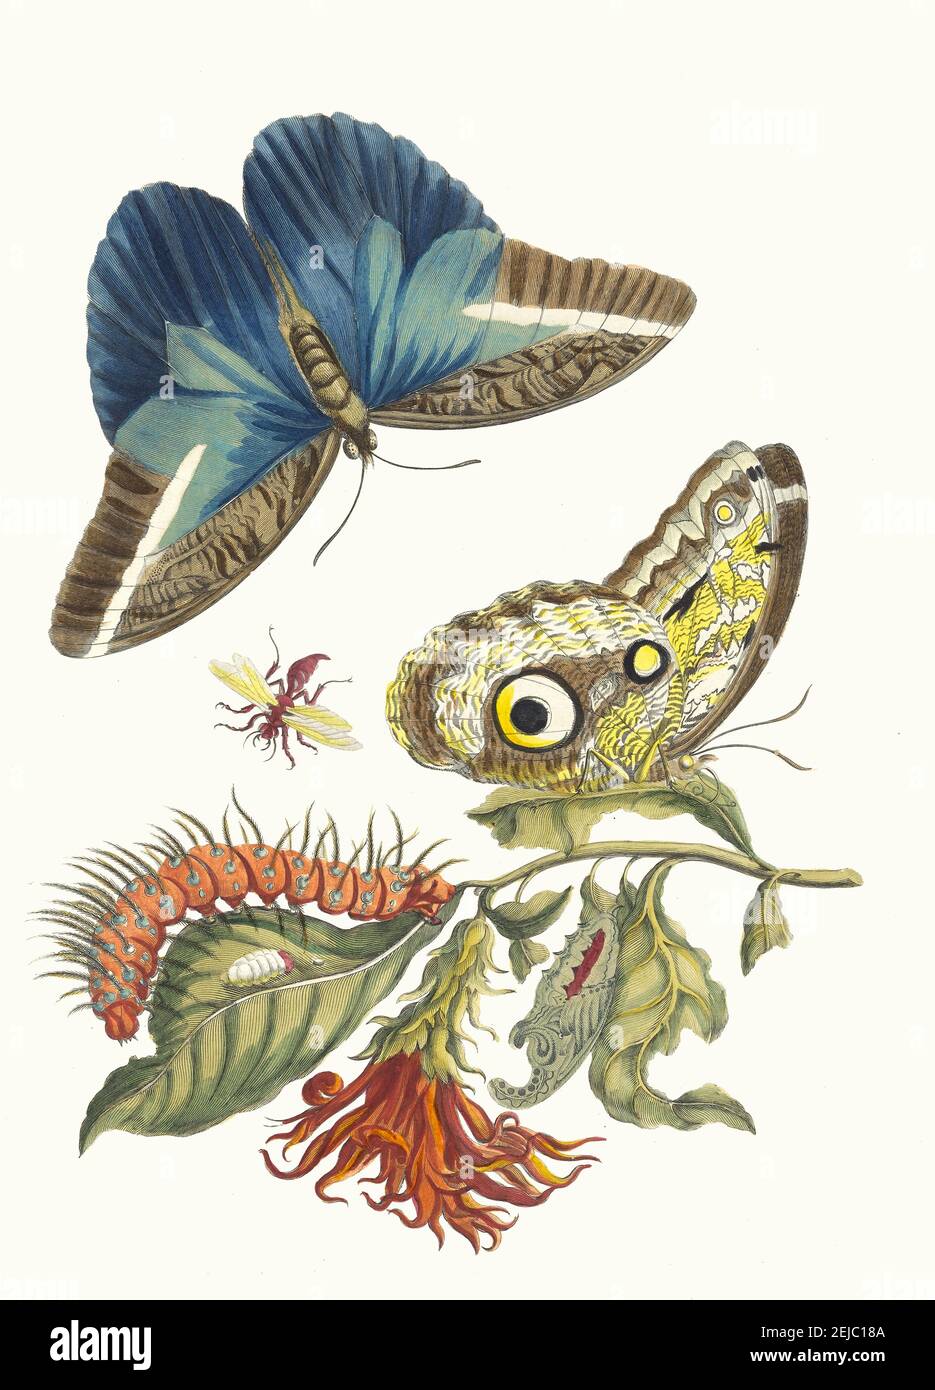 Pachystachys coccinea. From the Book Metamorphosis insectorum Surinamensium. Museum: PRIVATE COLLECTION. Author: MARIA SIBYLLA MERIAN. Stock Photo